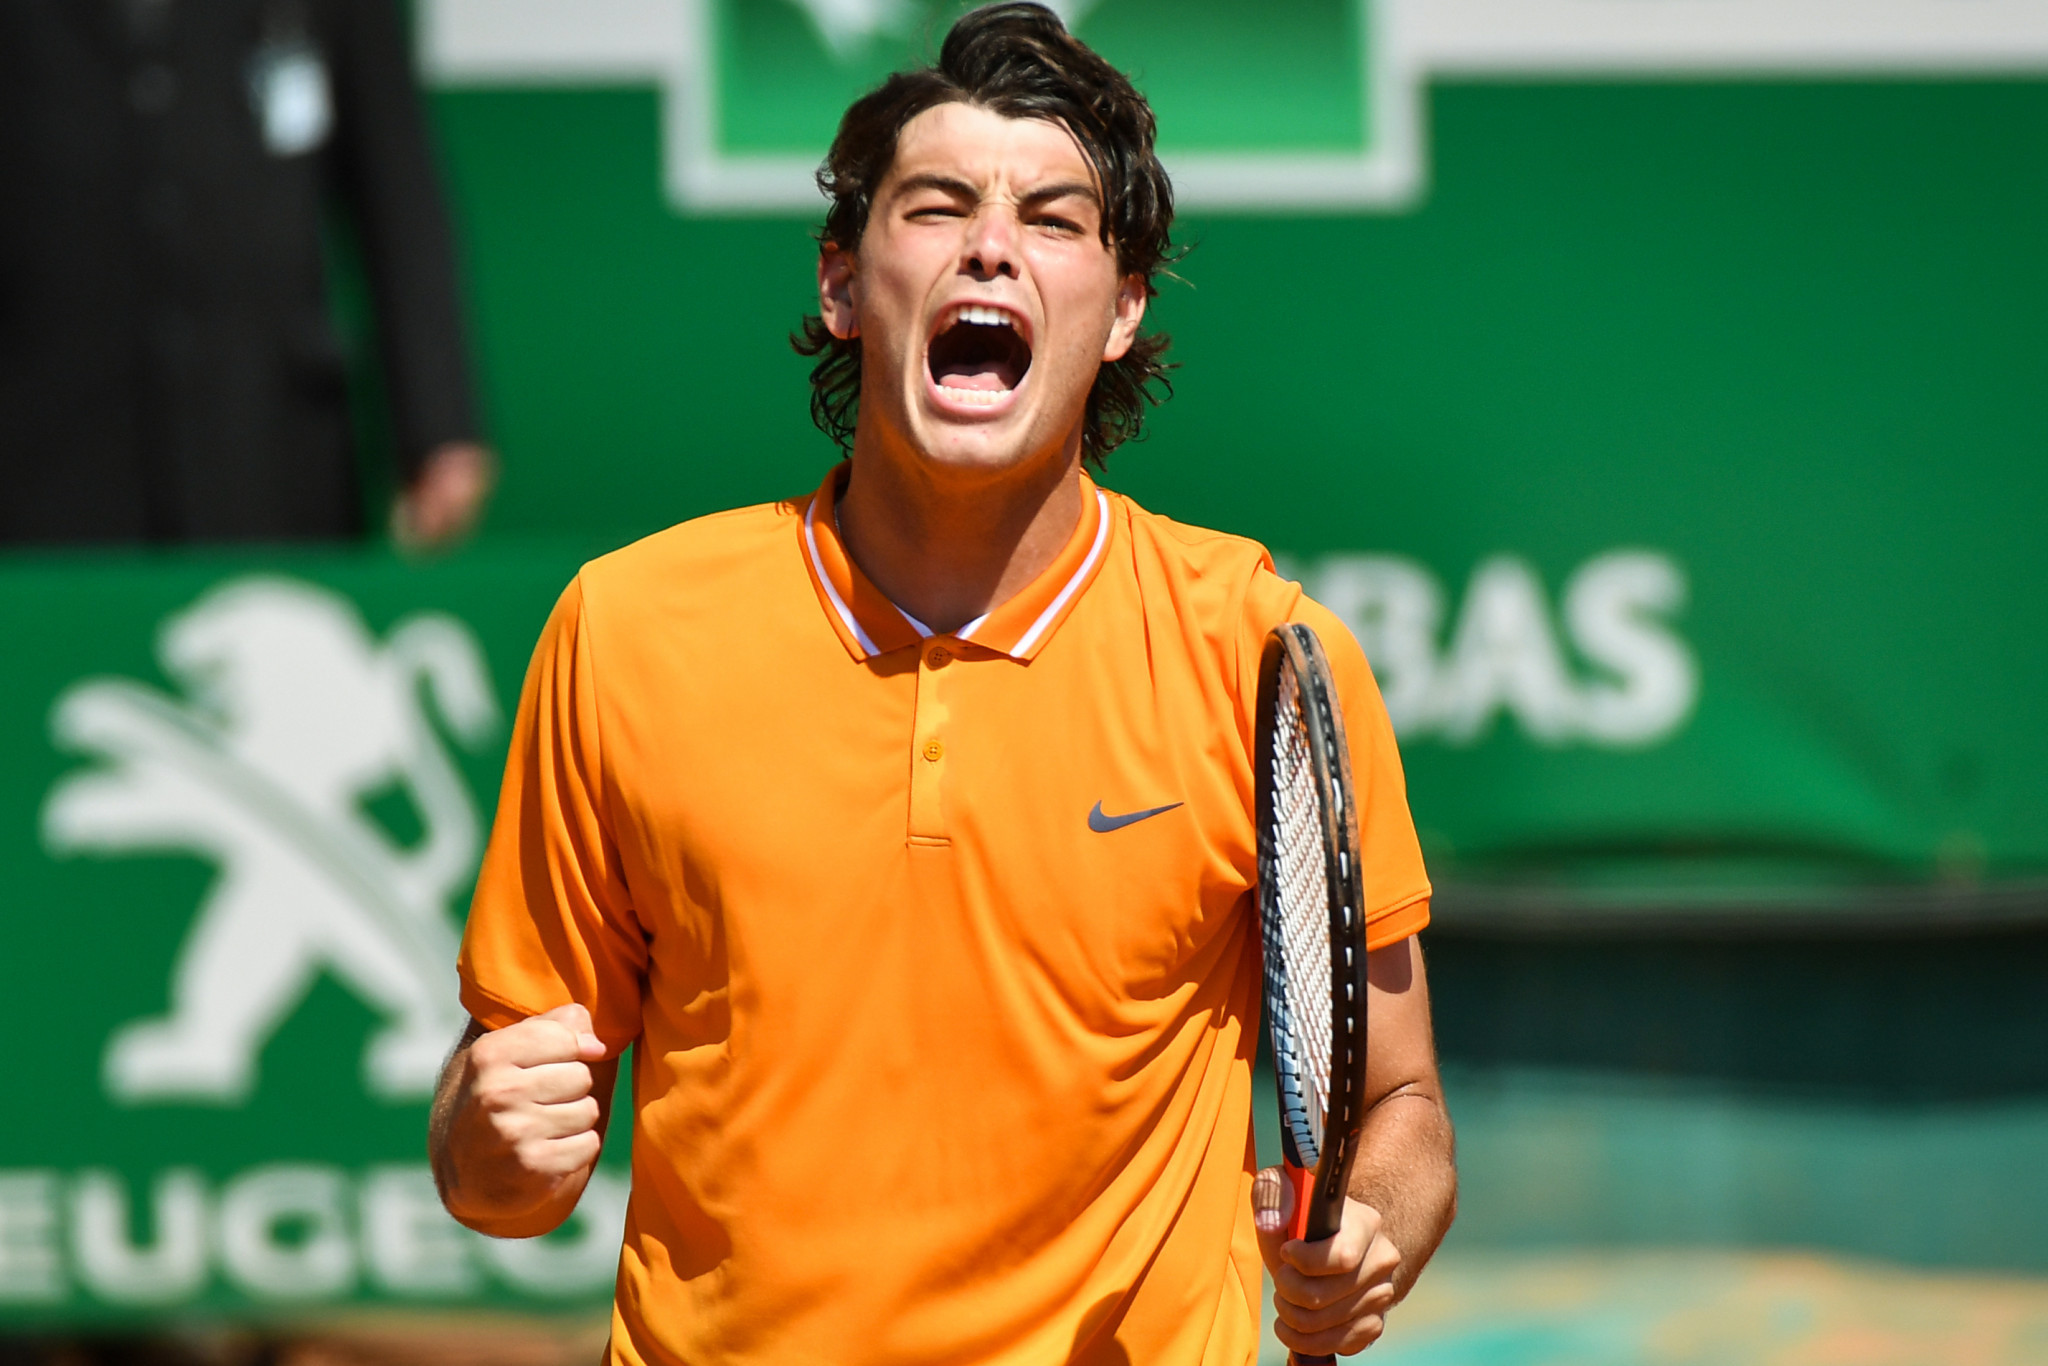 America's Taylor Fritz will play world number one, Nadal Djokovic of Serbia, in the next round of the Monte-Carlo Masters ©Getty Images